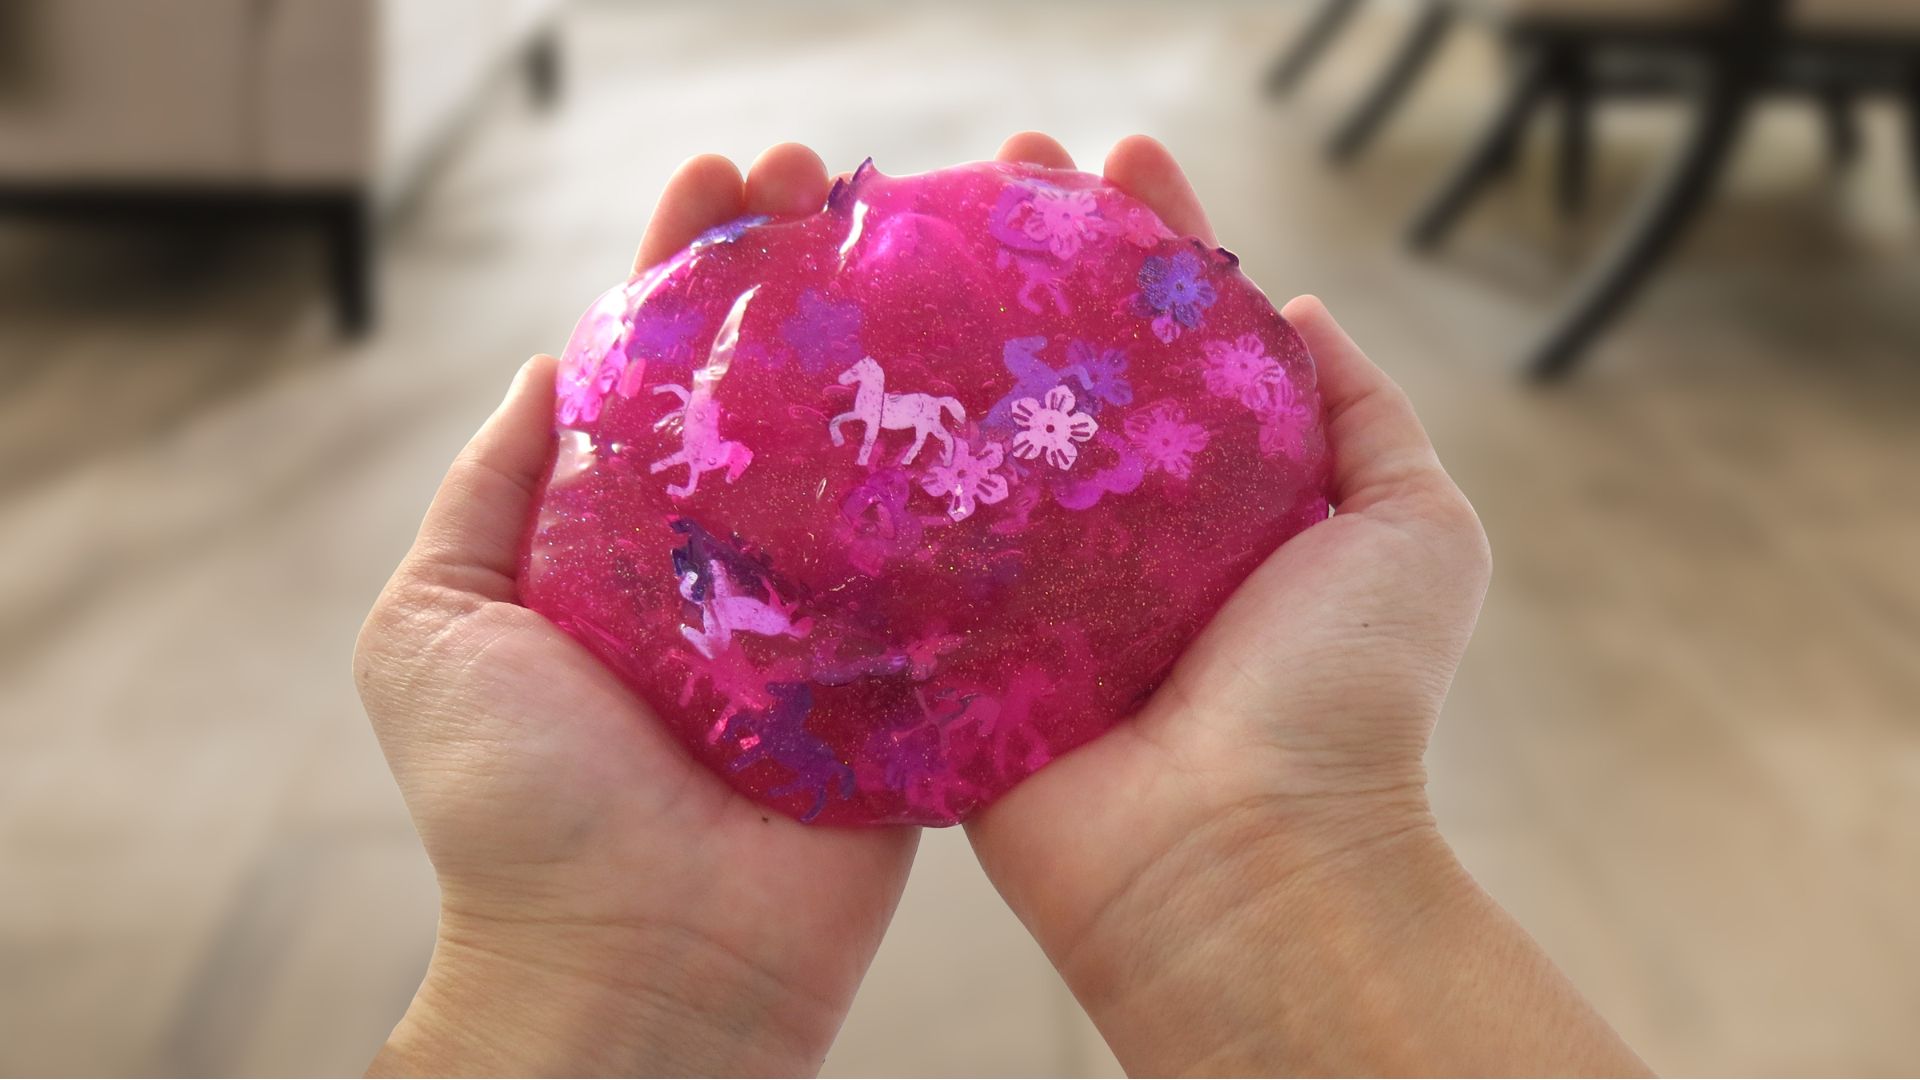 Semi-transparent pink glitter slime with metallic flower and horse sequins